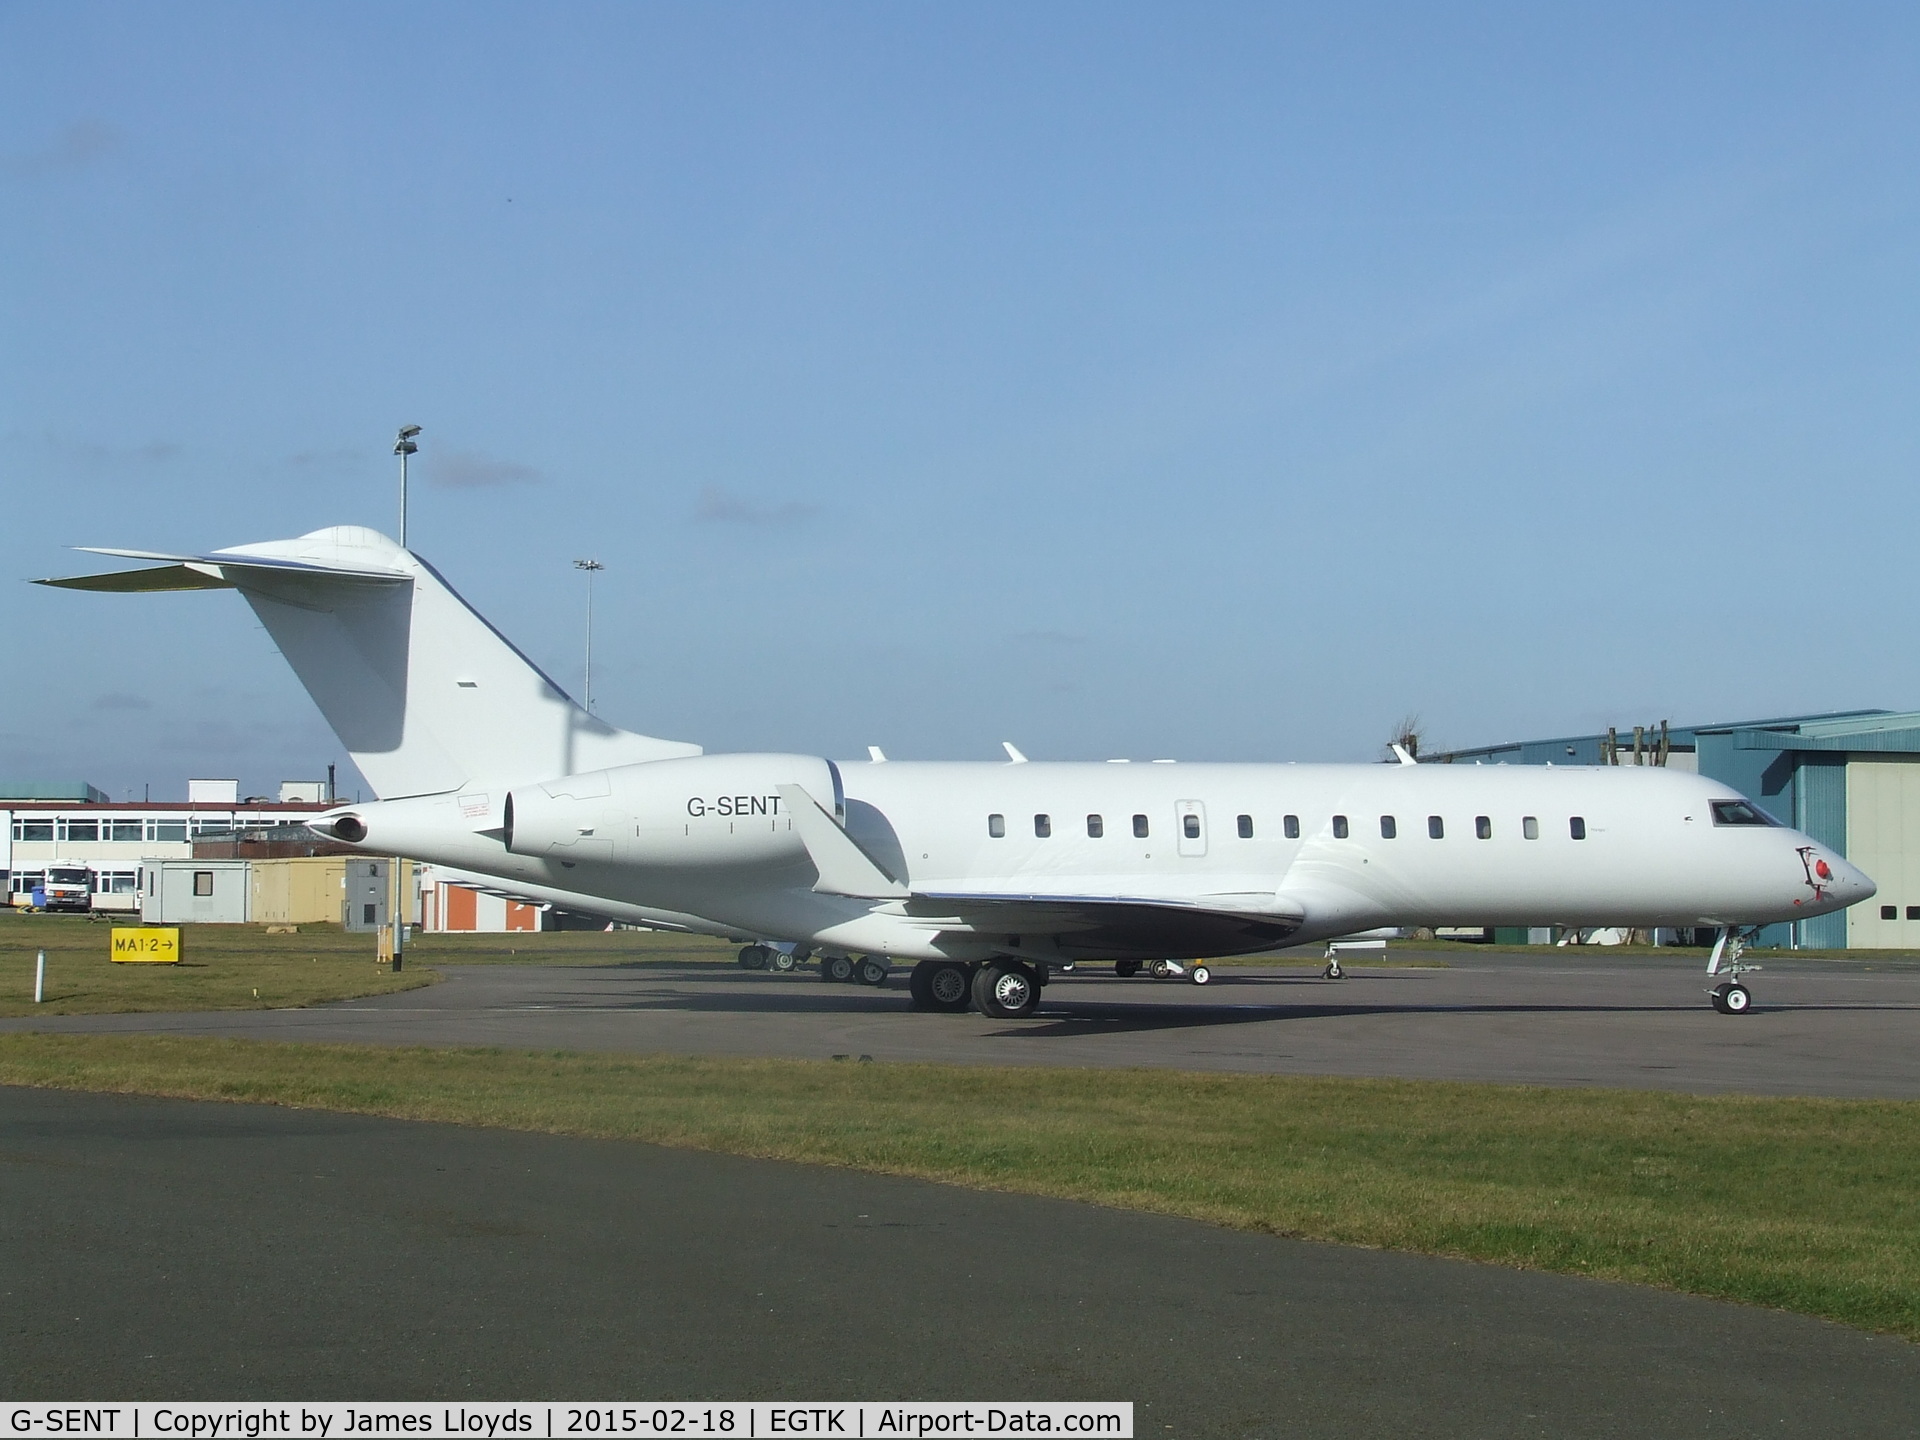 G-SENT, 2001 Bombardier BD-700-1A10 Global Express C/N 9094, G-SENT sat at Oxford on 18th Feb 2015.